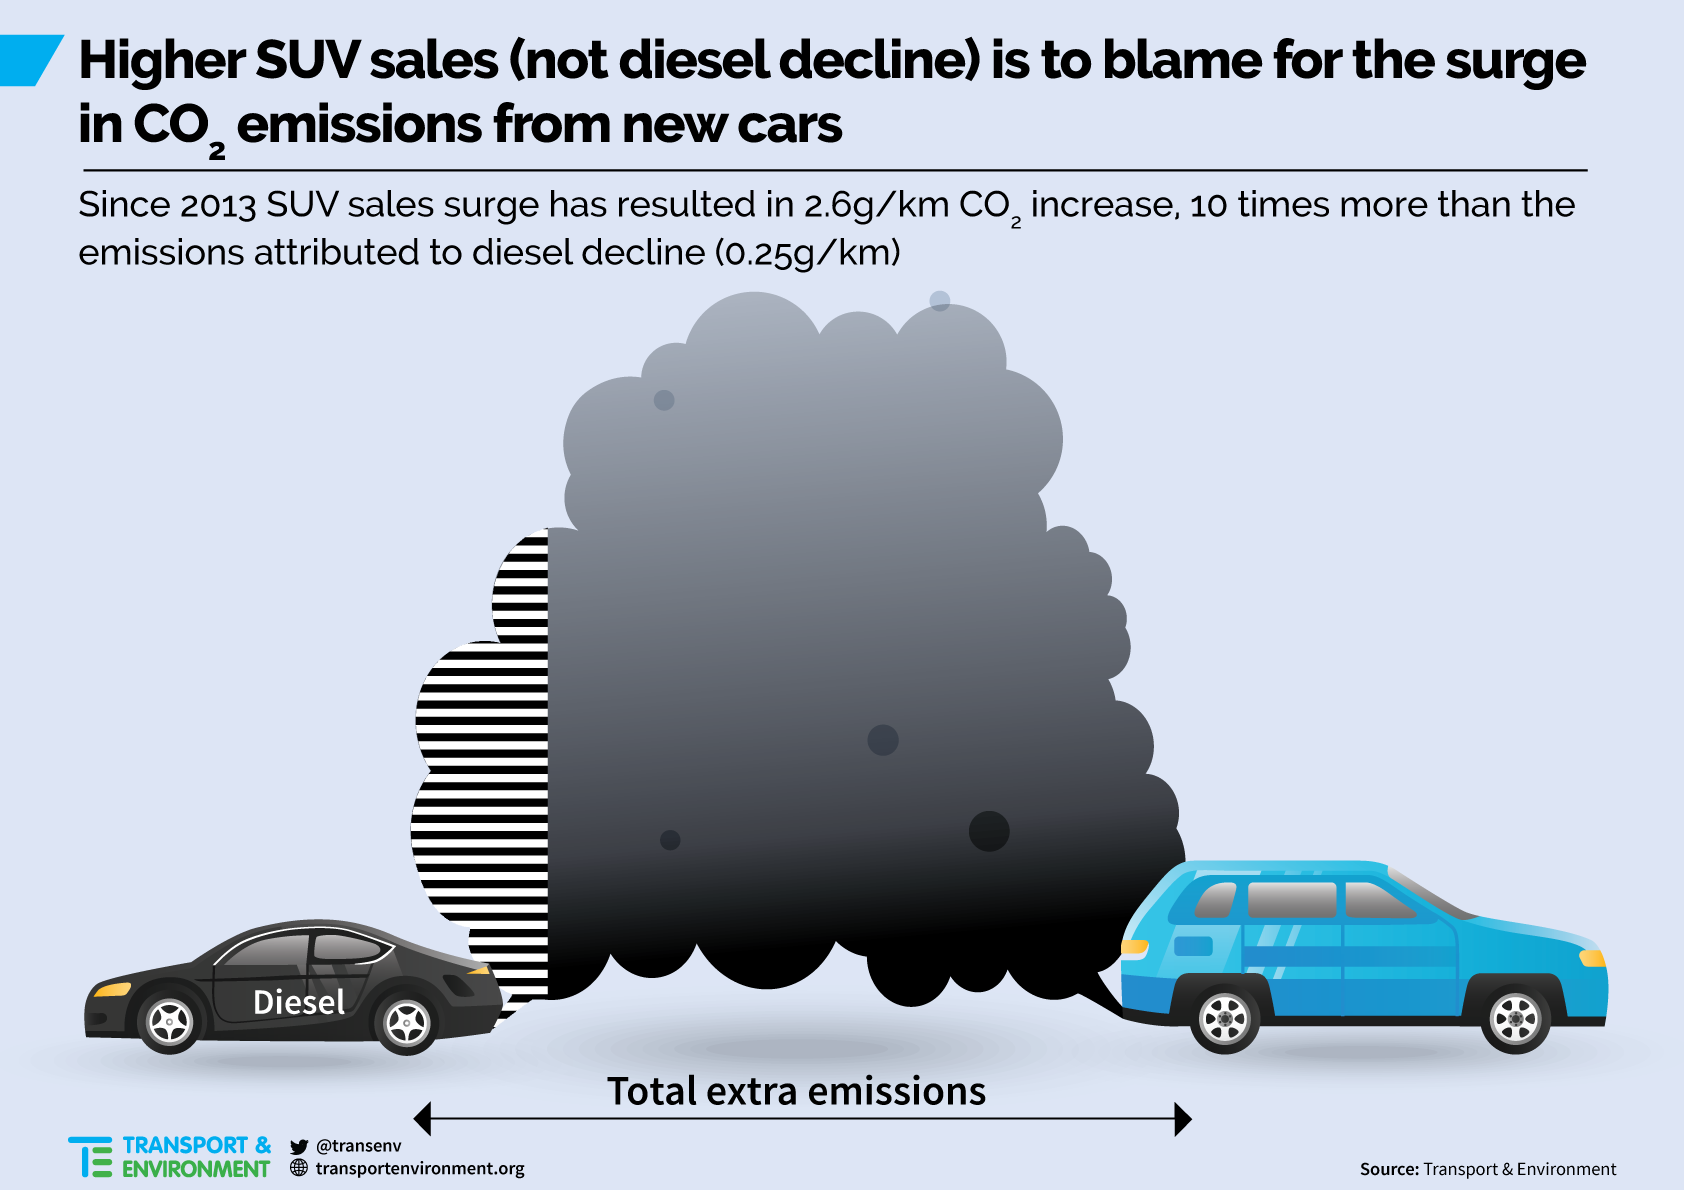 Higher SUV sales, not diesel decline, to blame for rise in CO2 emissions from new cars in Europe